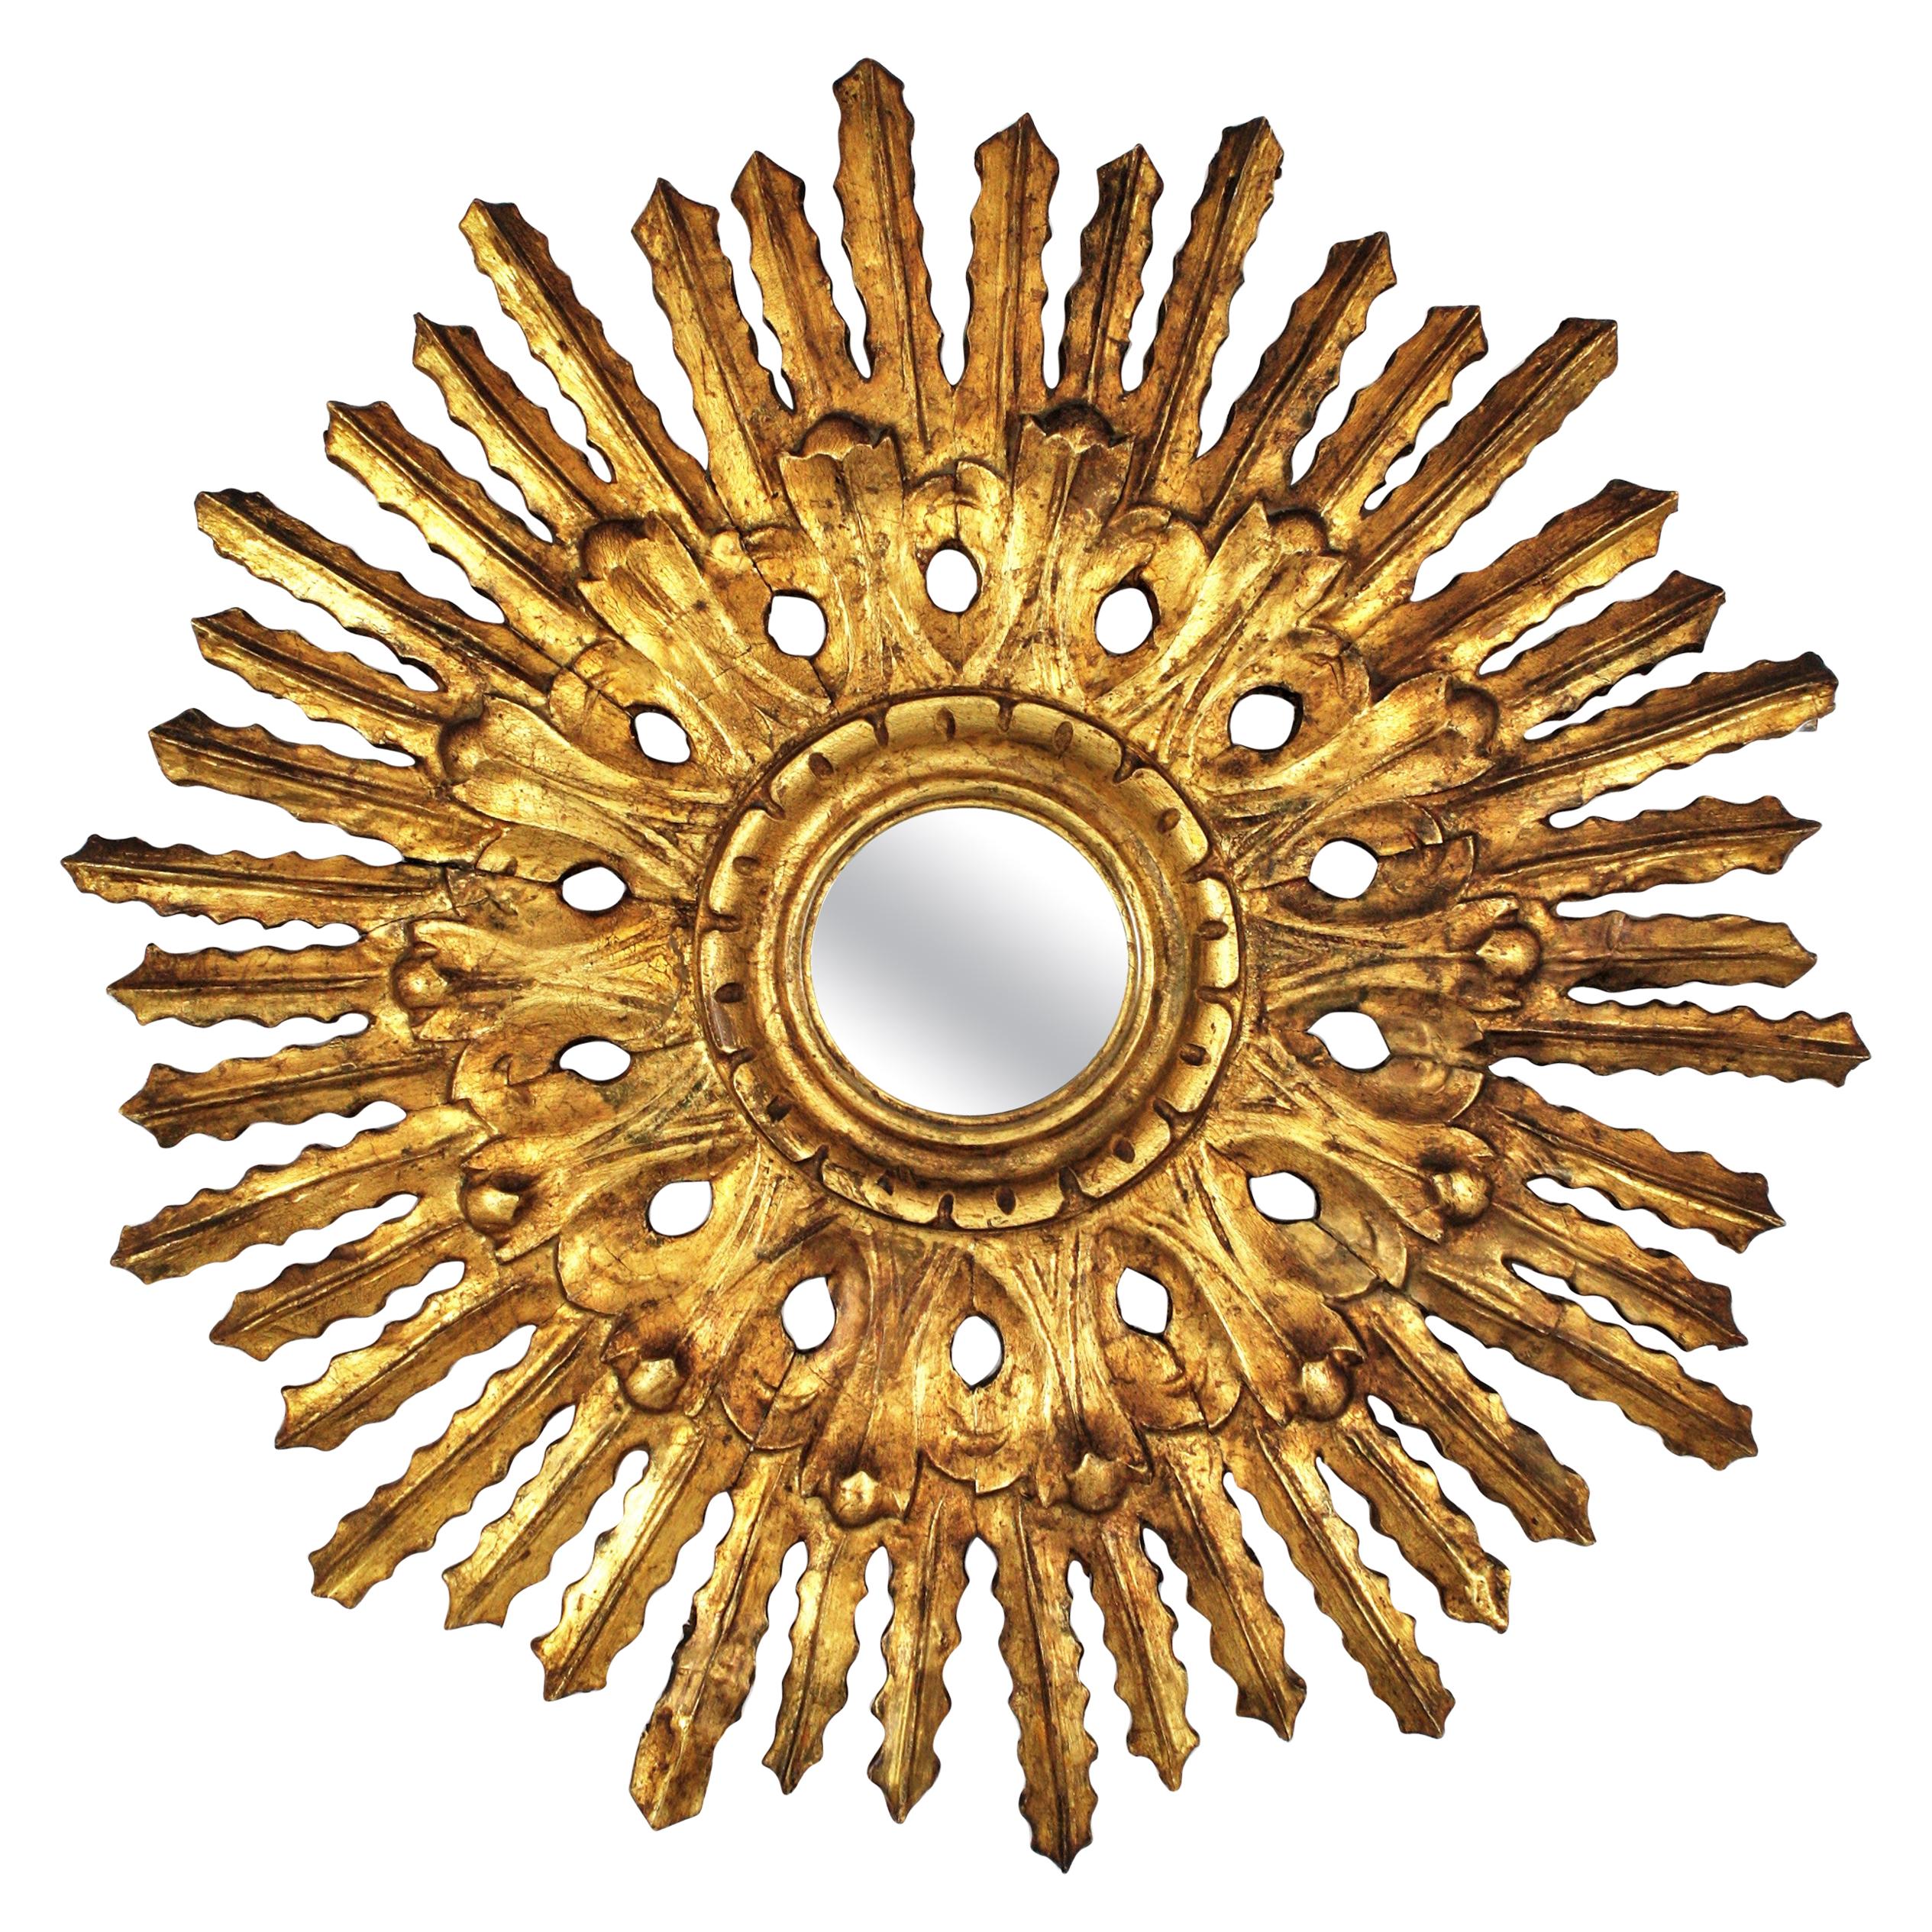 Sunburst Mirror in Carved Gold Leaf Giltwood and Baroque Style, Spain, 1920s